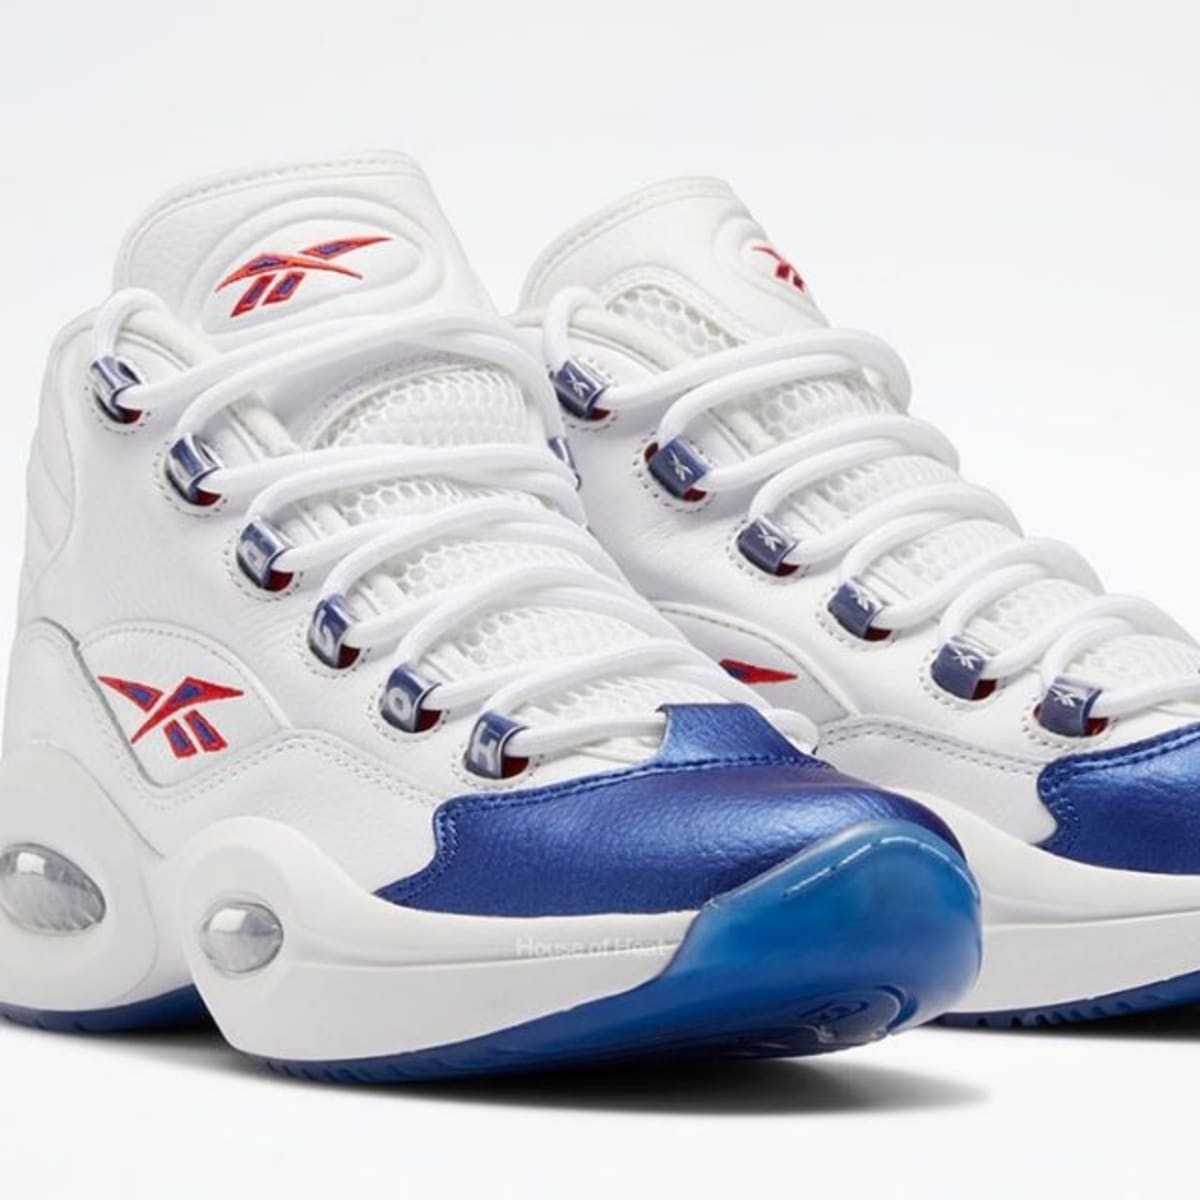 Reebok Question Mid 'Blue Toe' Release Information - Sports Illustrated  FanNation Kicks News, Analysis and More